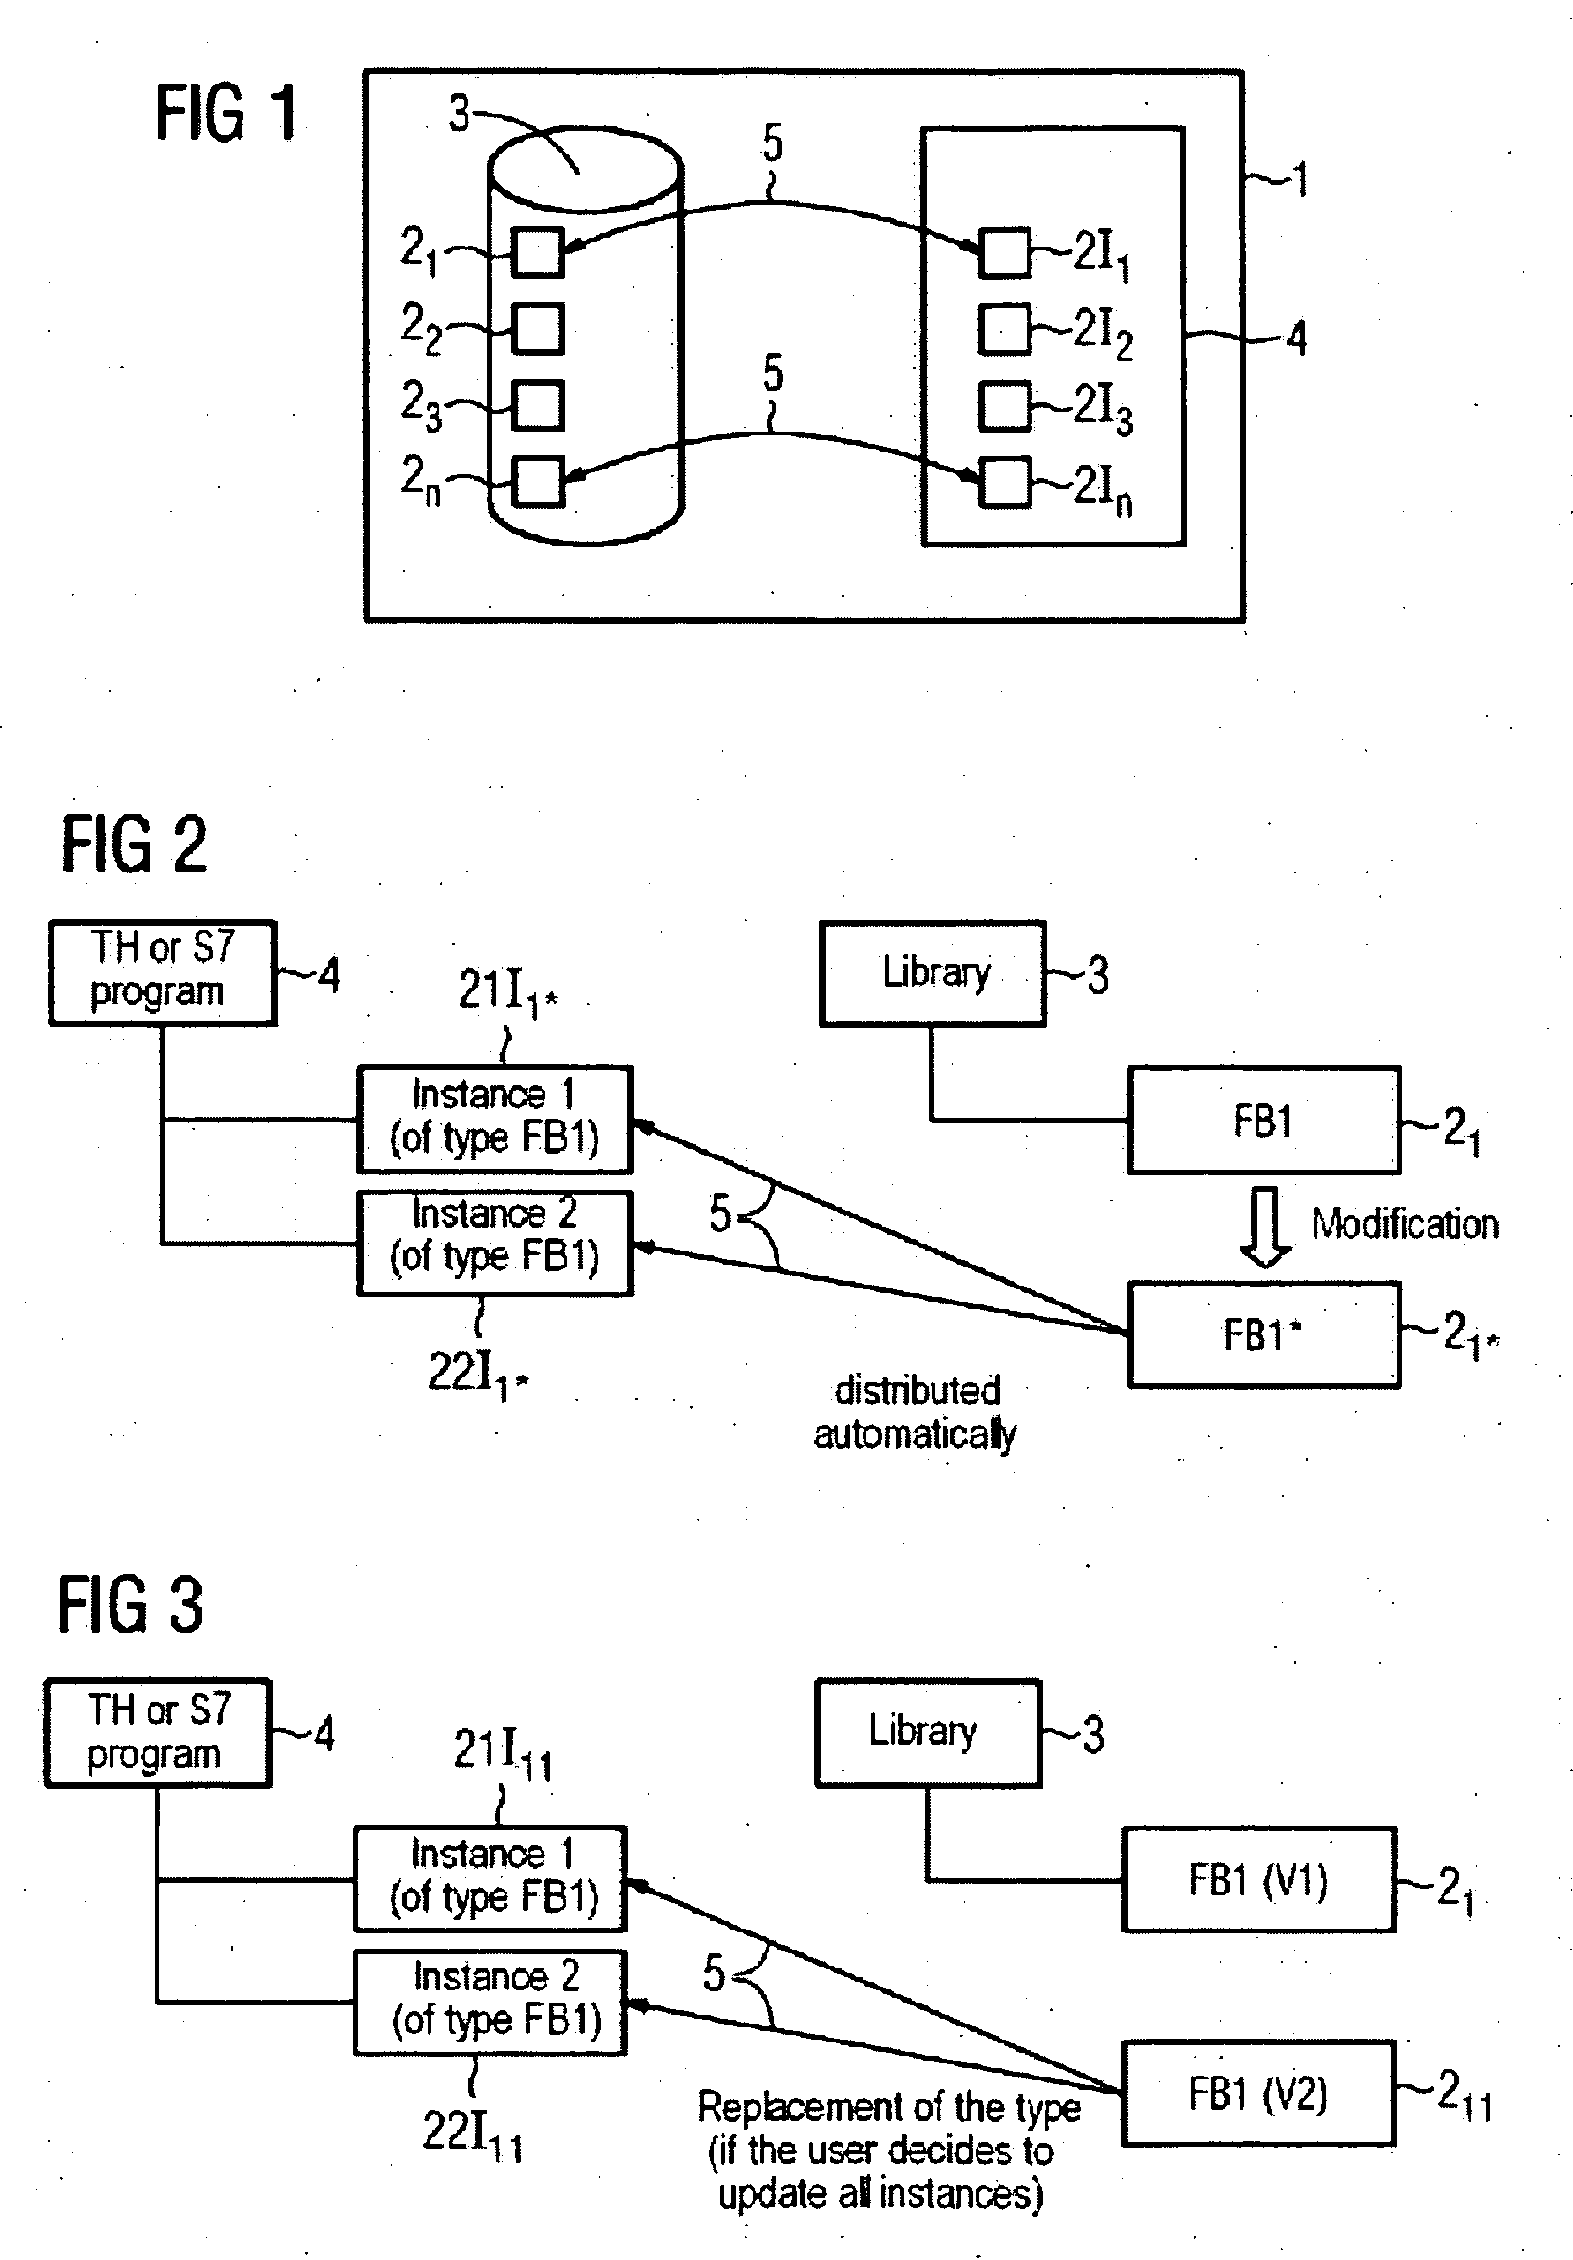 System and method for reusing project engineering data